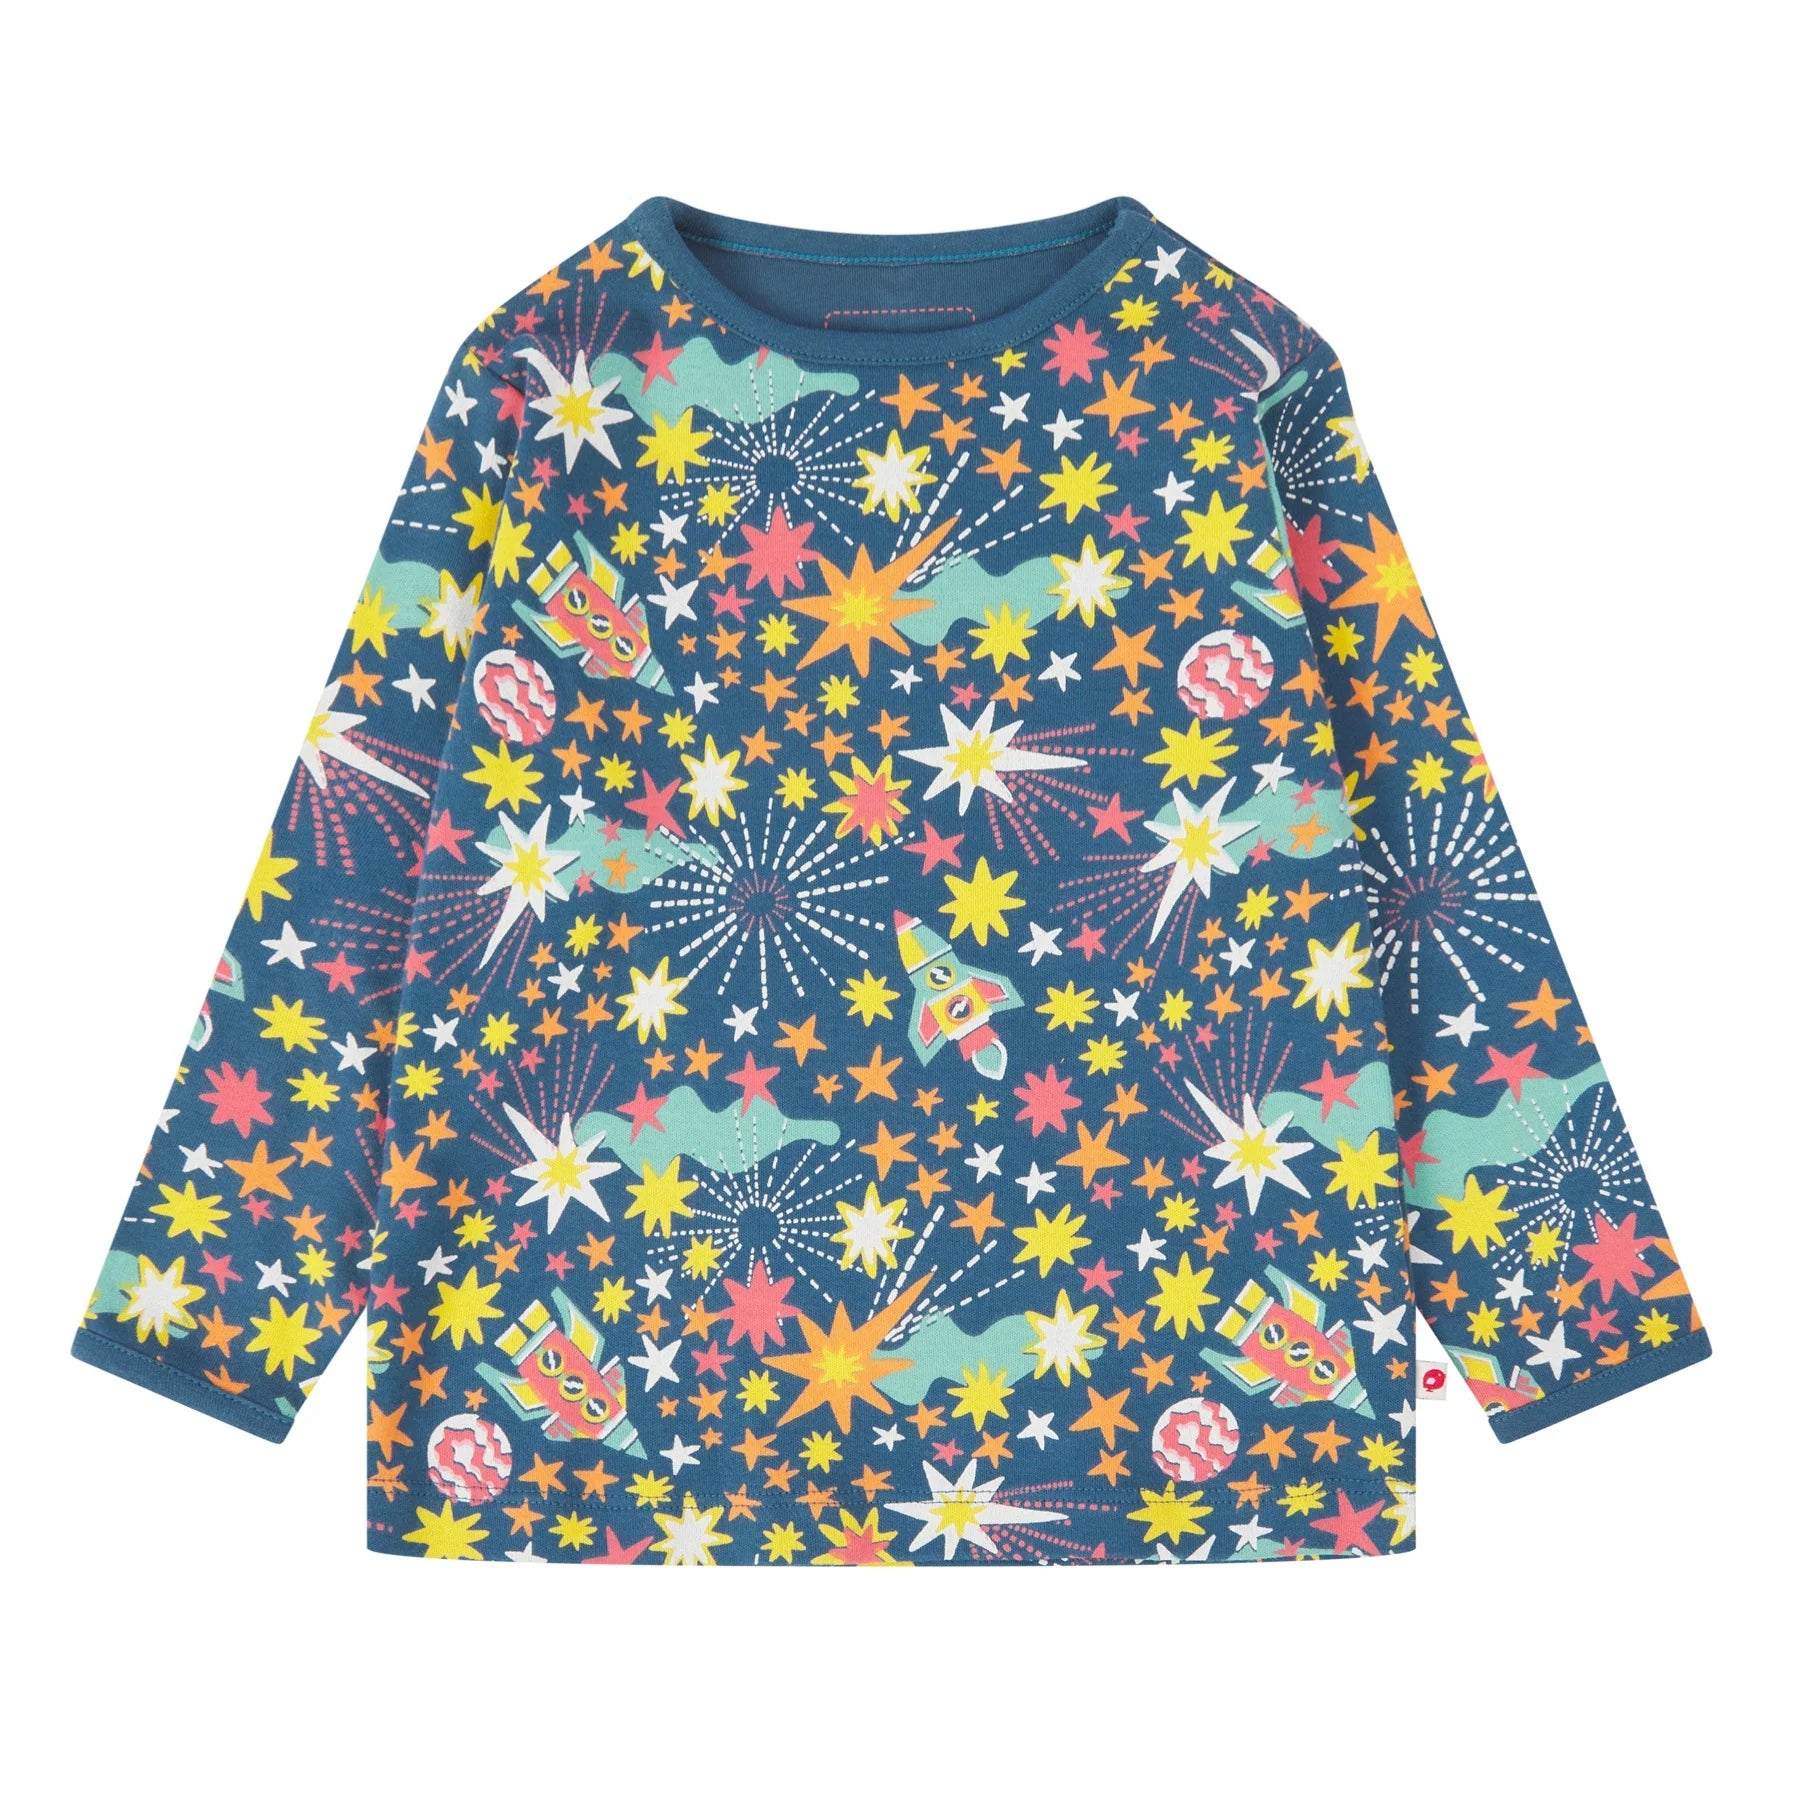 Piccalilly Kids Fitted Top - Galaxy